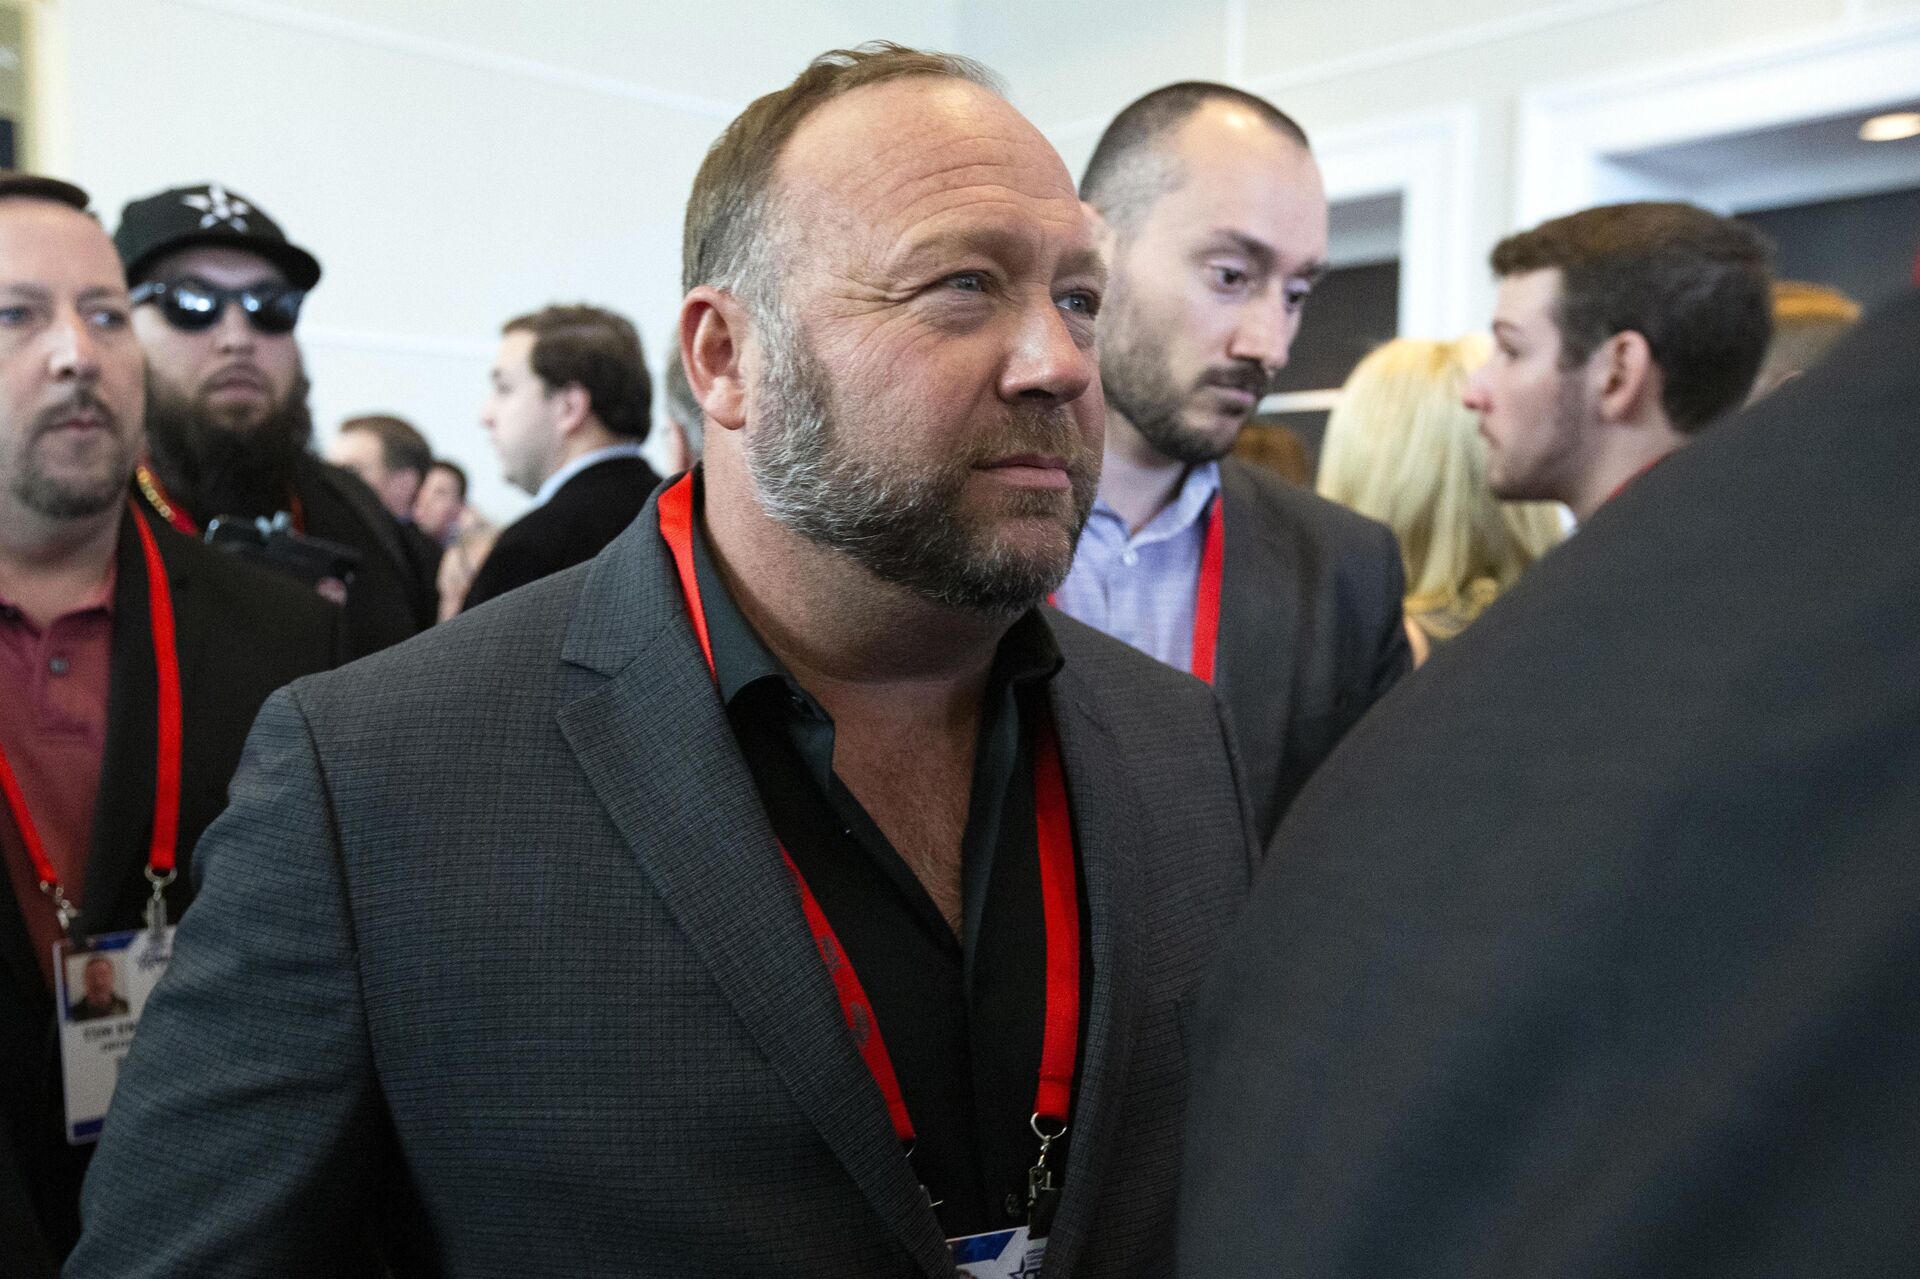 Conspiracy theorist Alex Jones walks at the Conservative Political Action Conference, CPAC 2020, at the National Harbor, in Oxon Hill, Md., Thursday, Feb. 27, 2020 - Sputnik International, 1920, 22.12.2021